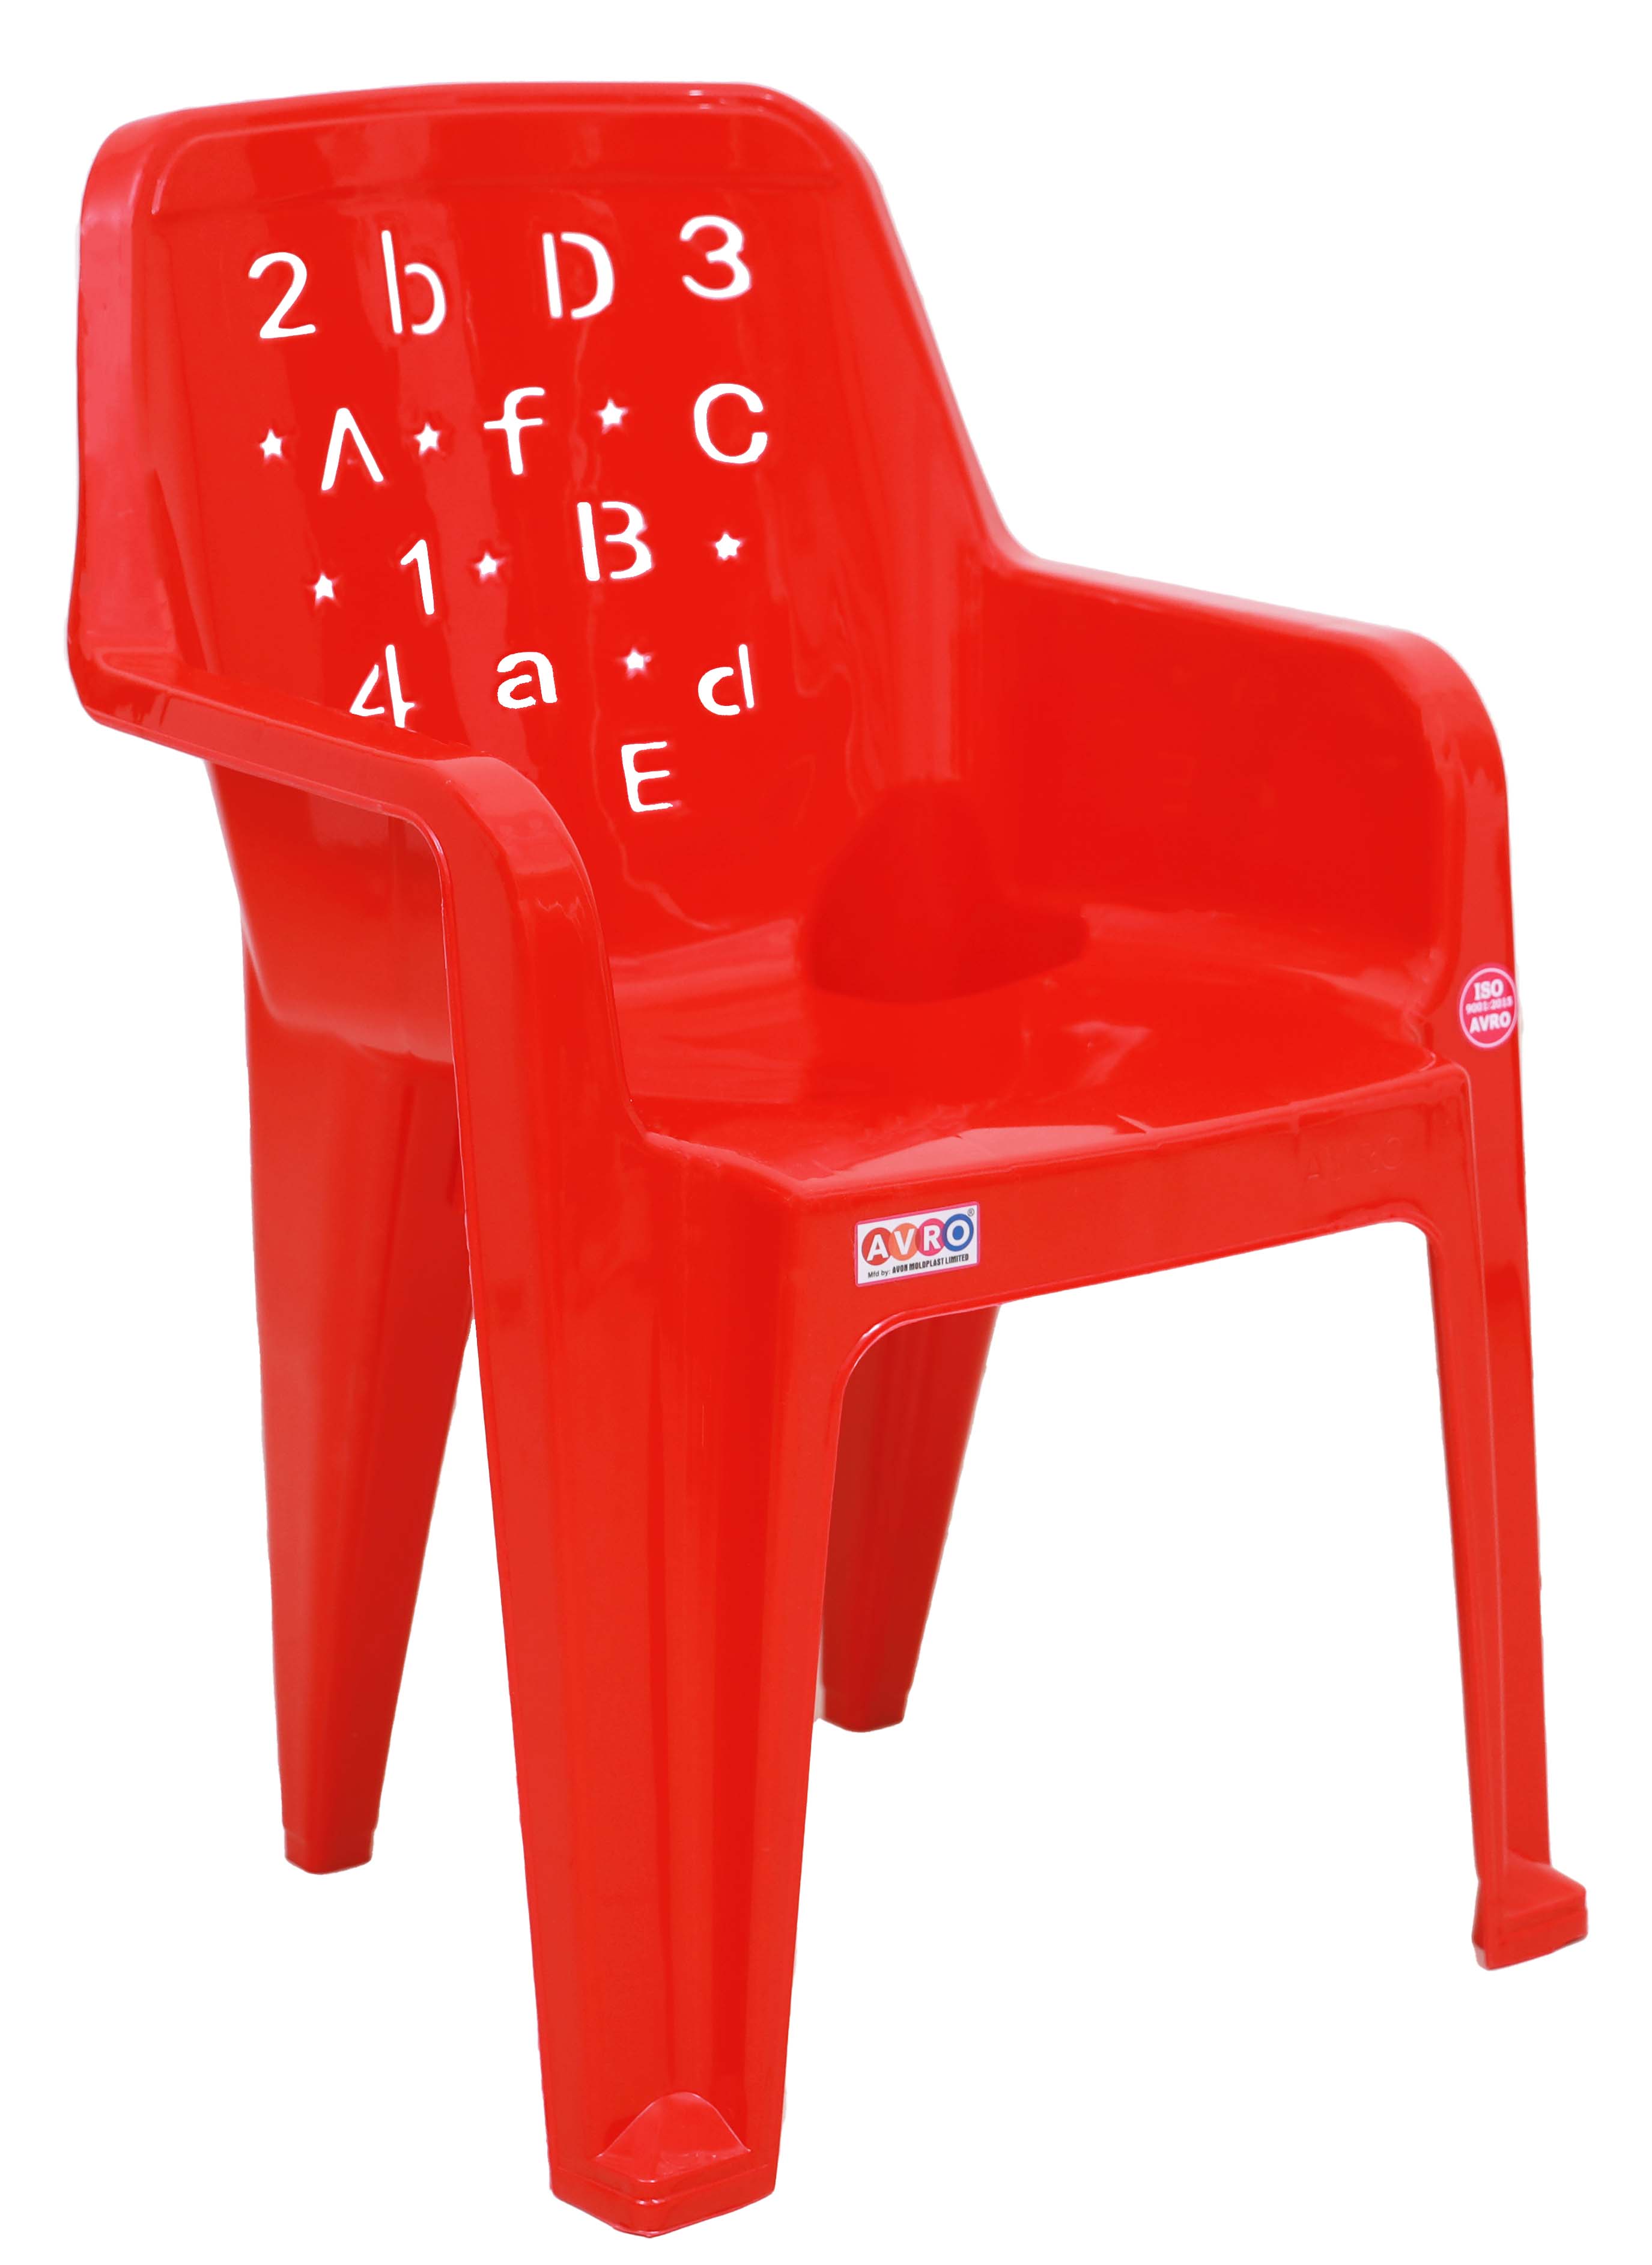 AVRO FURNITURE Joy Baby Chair for Kids,Plastic, Standard Size, Red